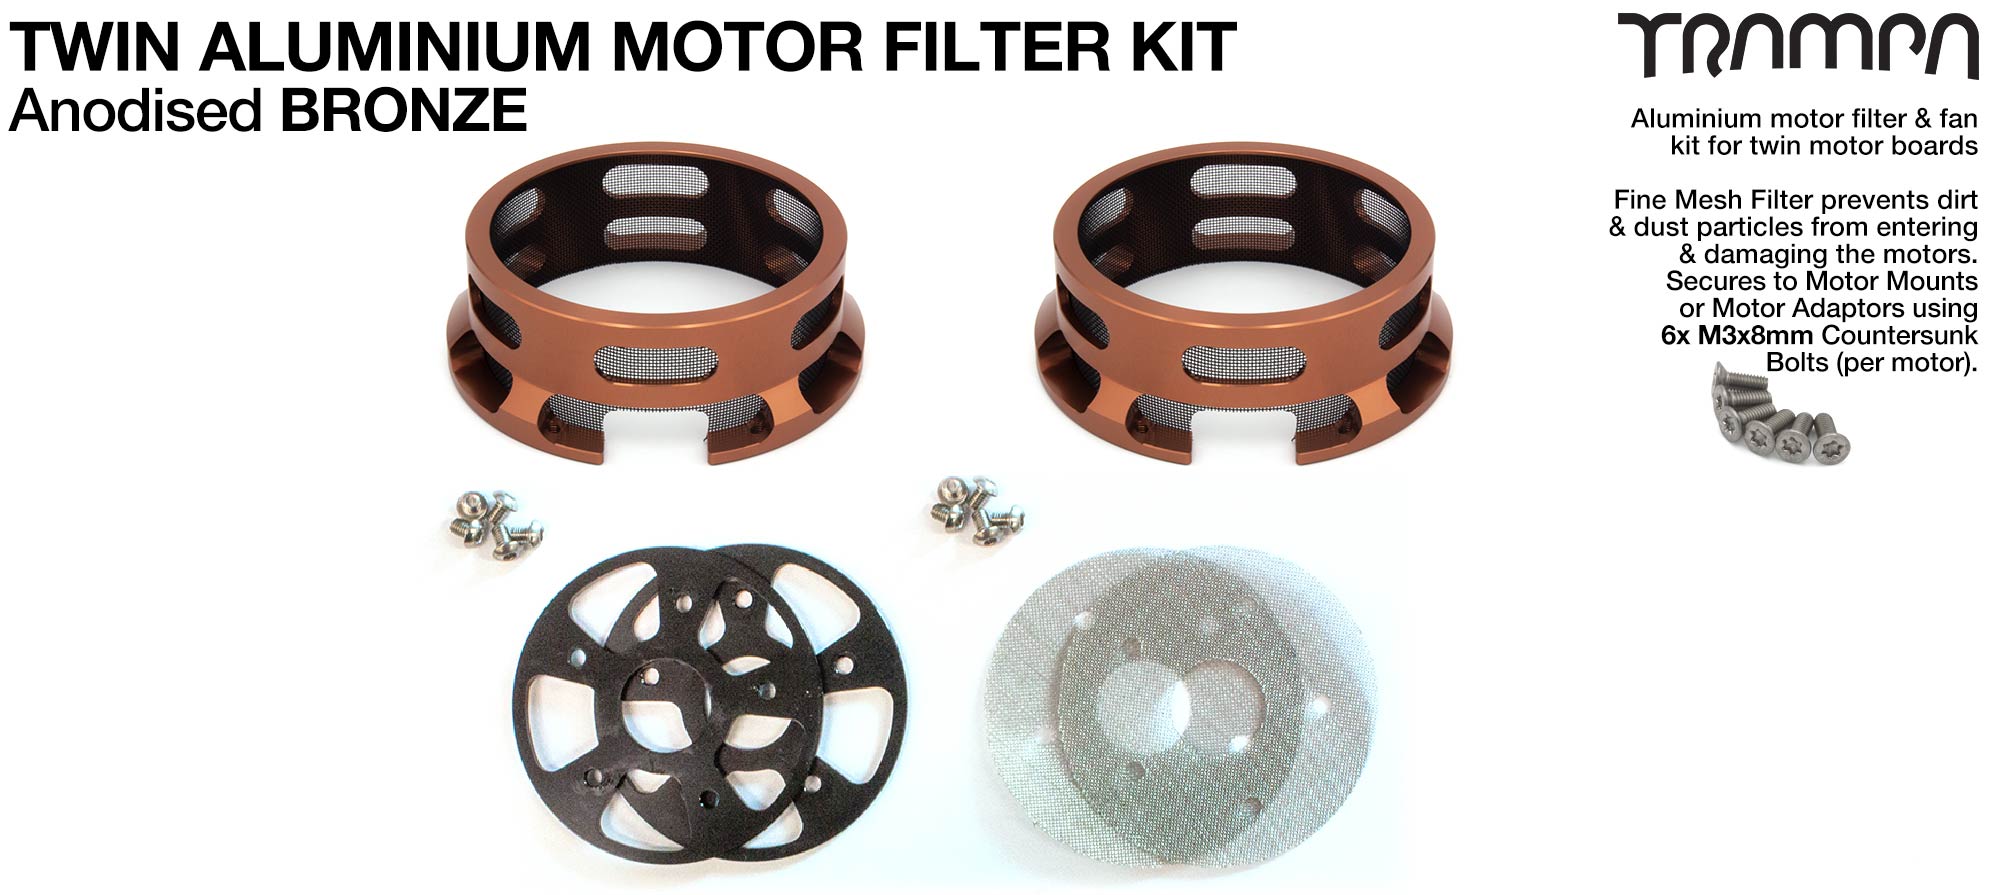 HALF CAGE Motor protection  - BRONZE anodised with Filters - TWIN